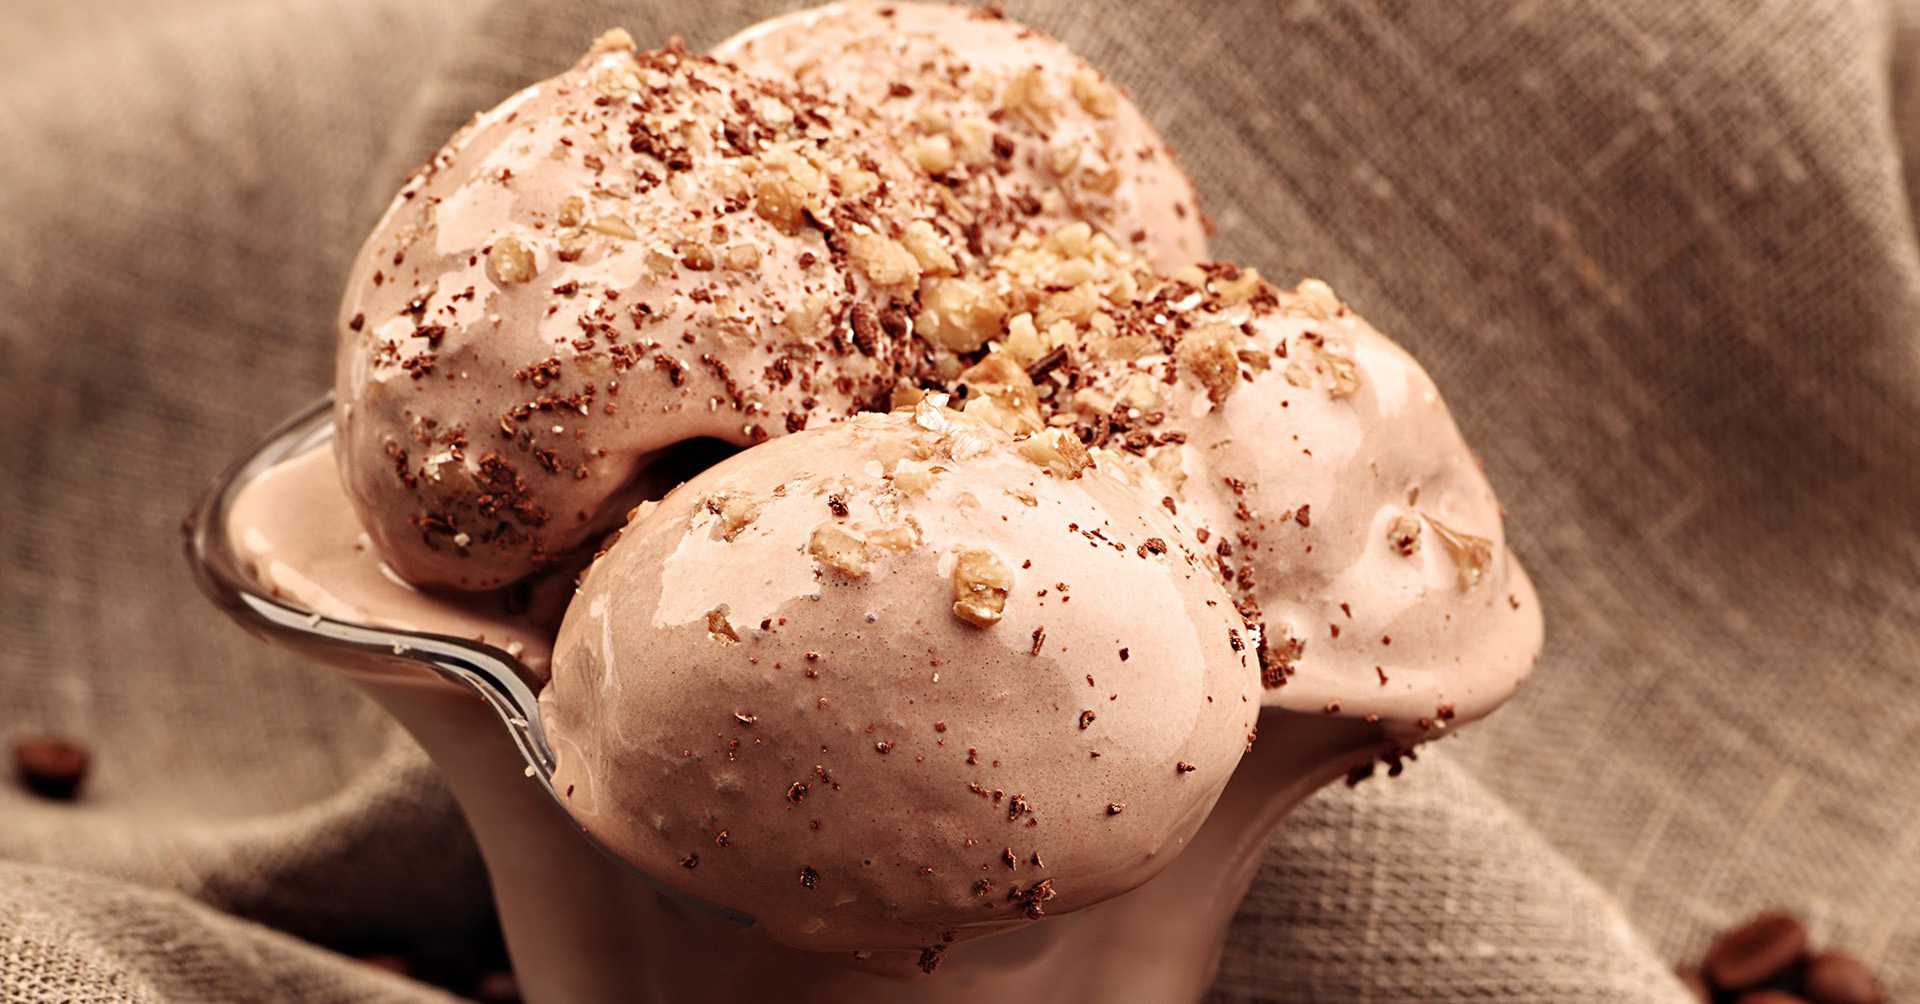 Yummy Ice Creams And Nuts Wallpaper